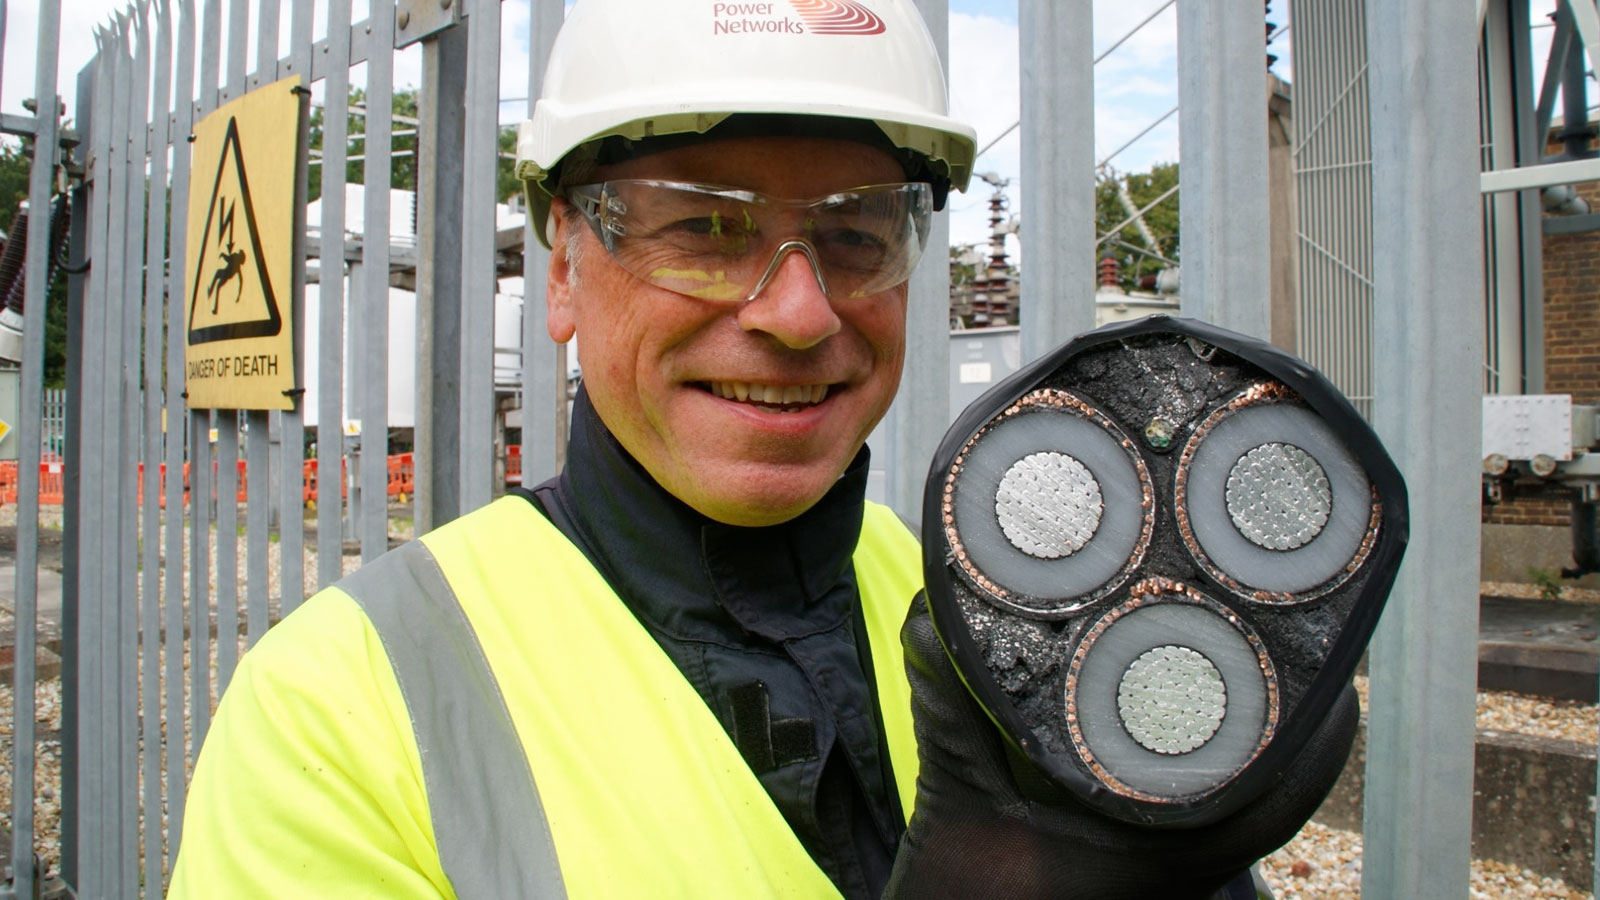 £10.6 million power infrastructure upgrade completed between Worthing and Steyning